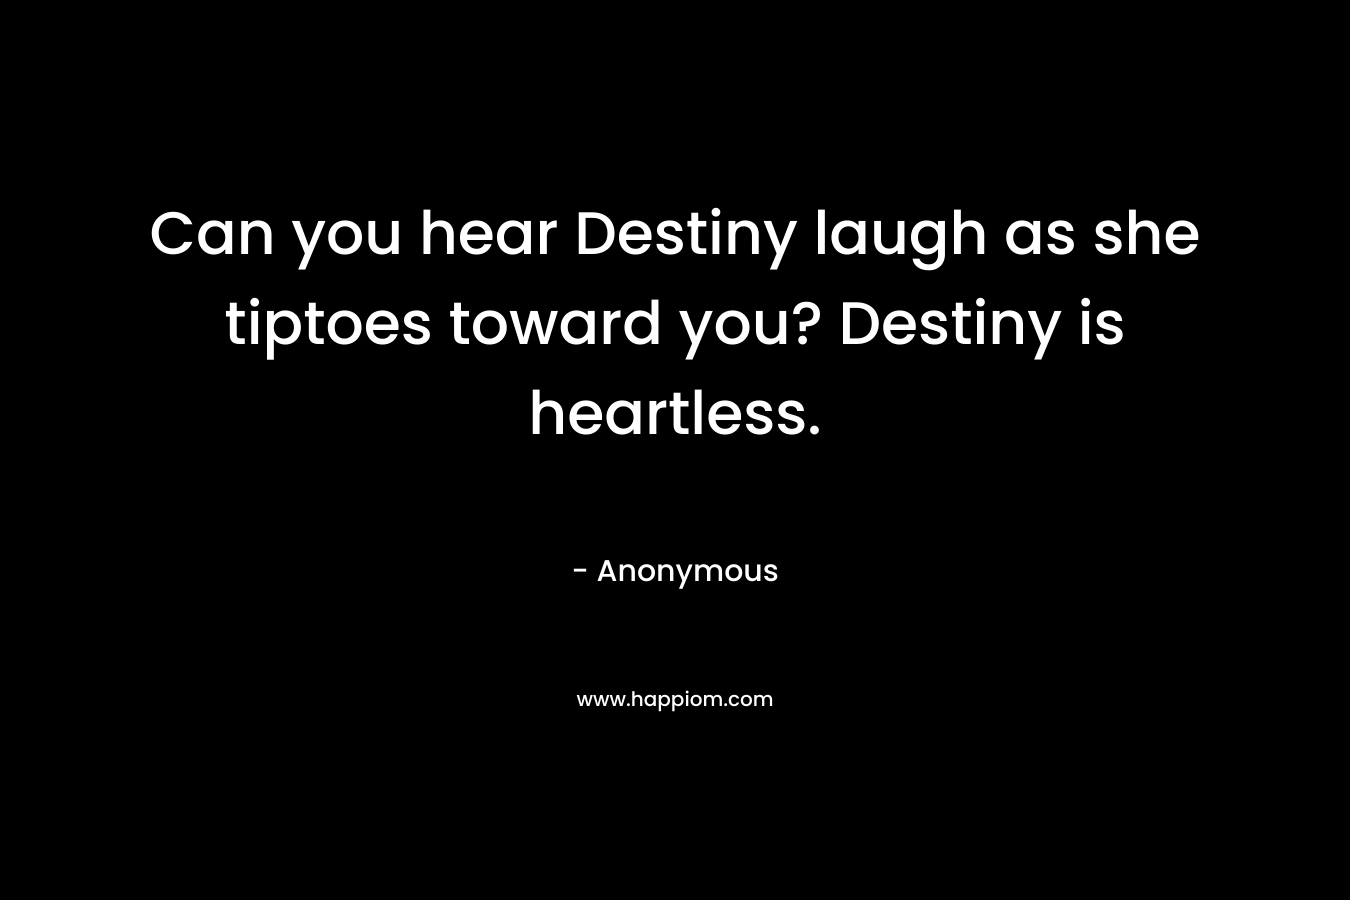 Can you hear Destiny laugh as she tiptoes toward you? Destiny is heartless.